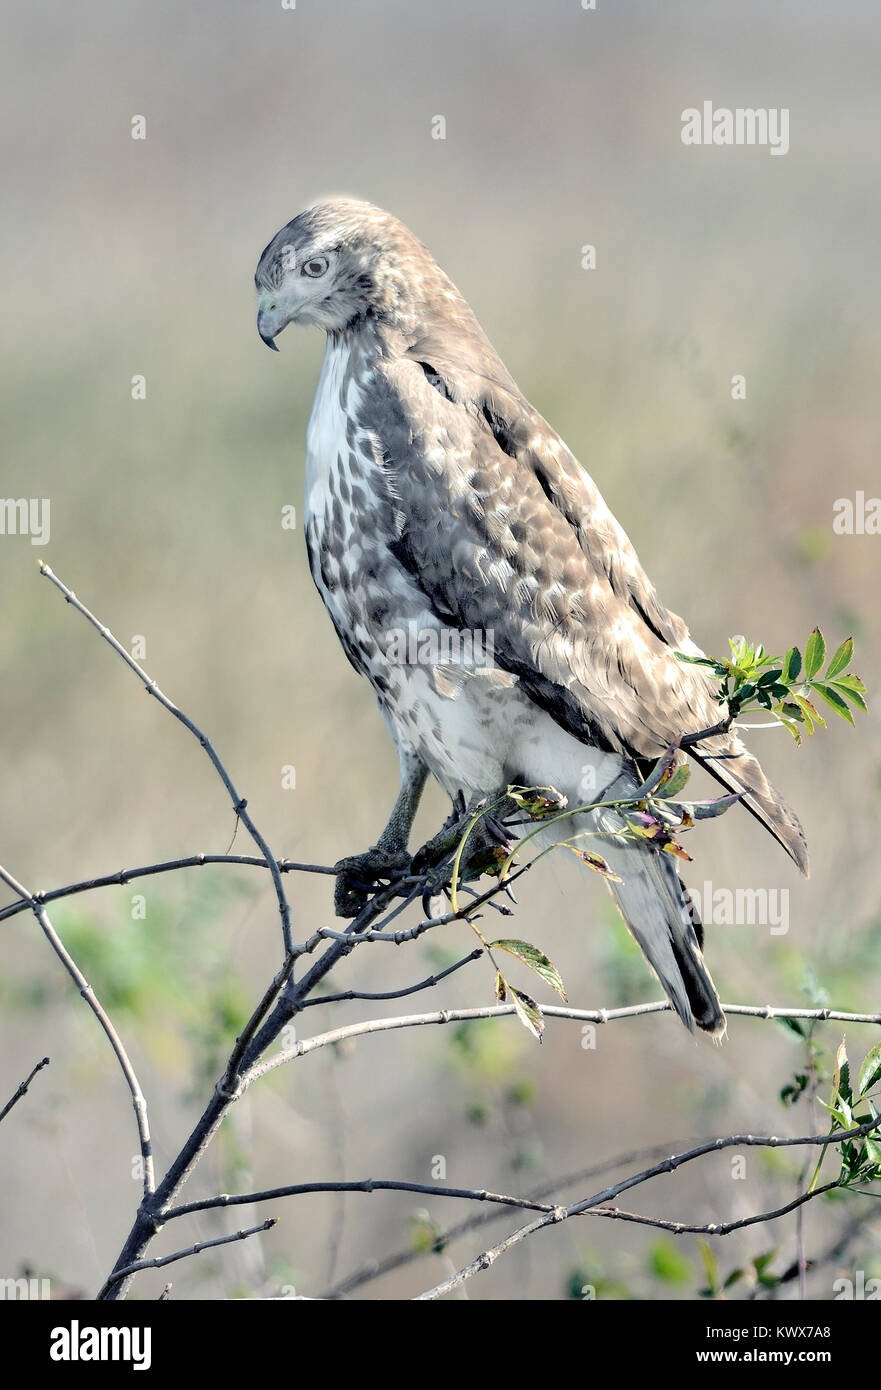 A Red Tailed Hawk - Buteo jamaicensis, perched on a branch, pictured against a blurred background. Stock Photo